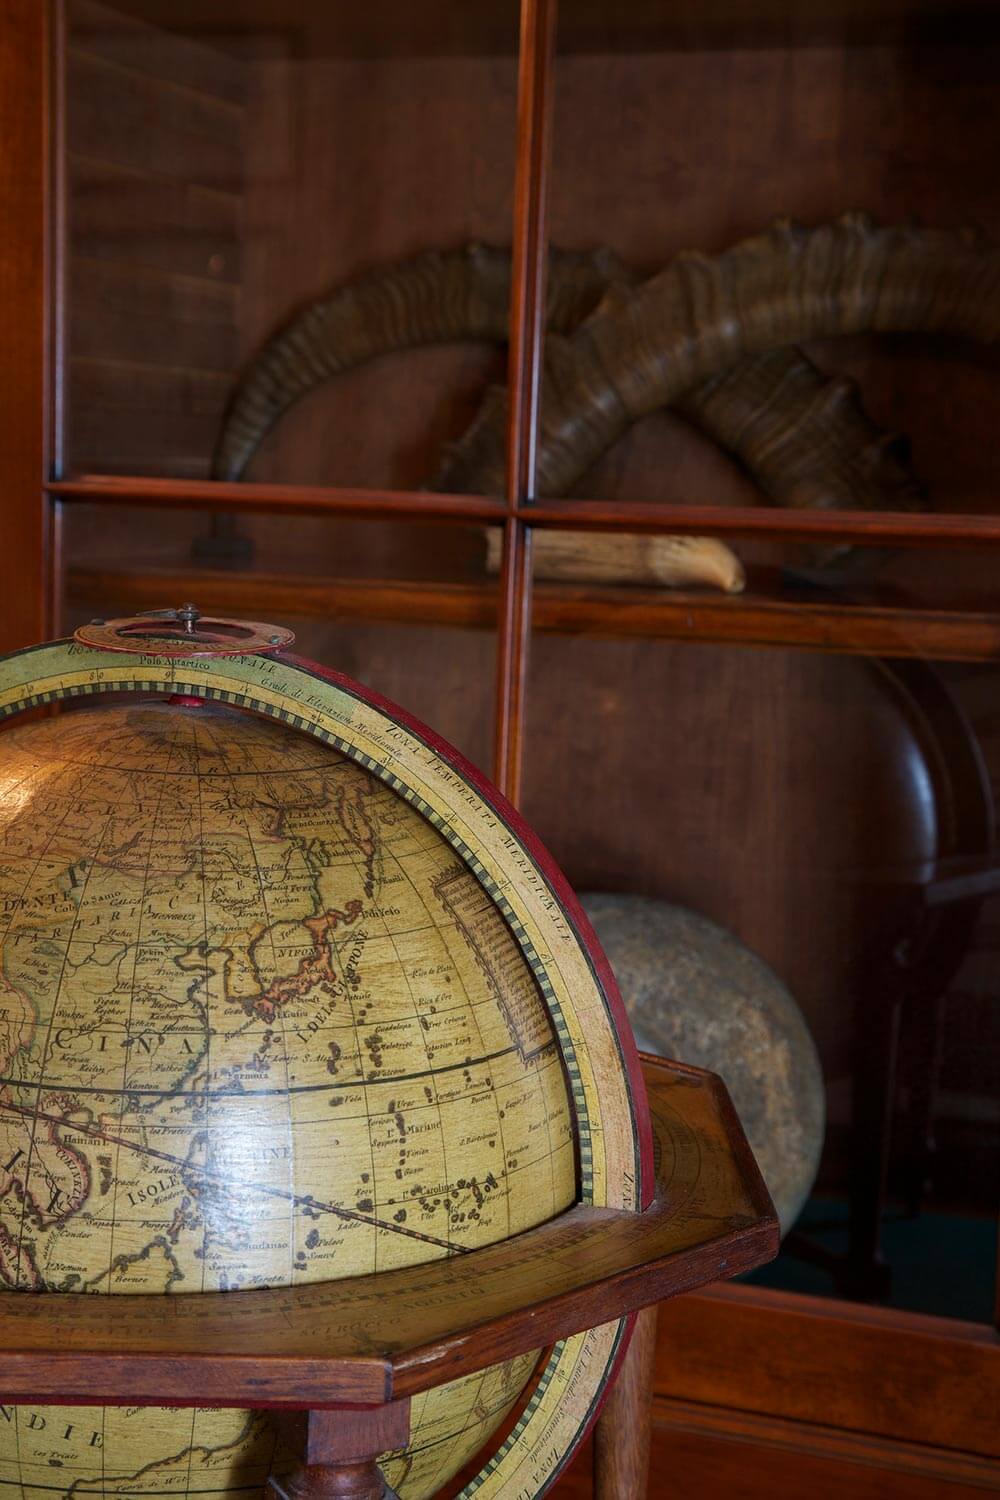 Close up of the globe